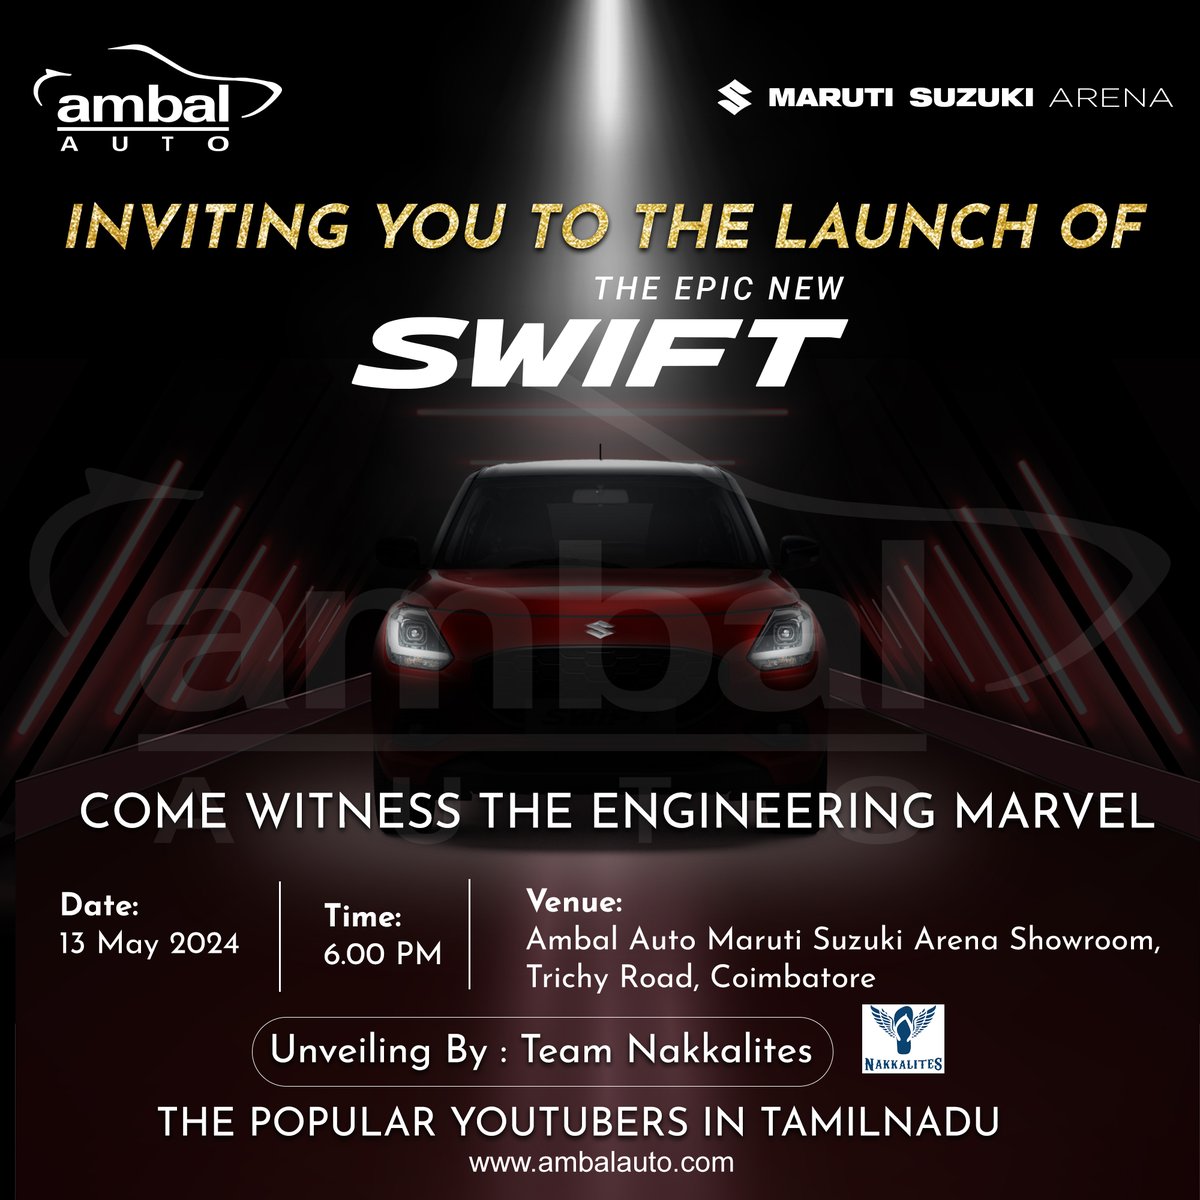 Buckle up for the ride of a lifetime! Introducing the Epic New Swift - where innovation meets exhilaration. Get ready to experience speed, style, and sheer thrill like never before! Join us for the grand launch!

#AmbalAuto #Nexa #Arena #SuperCarry #TrueValue #NewLaunch #Swift